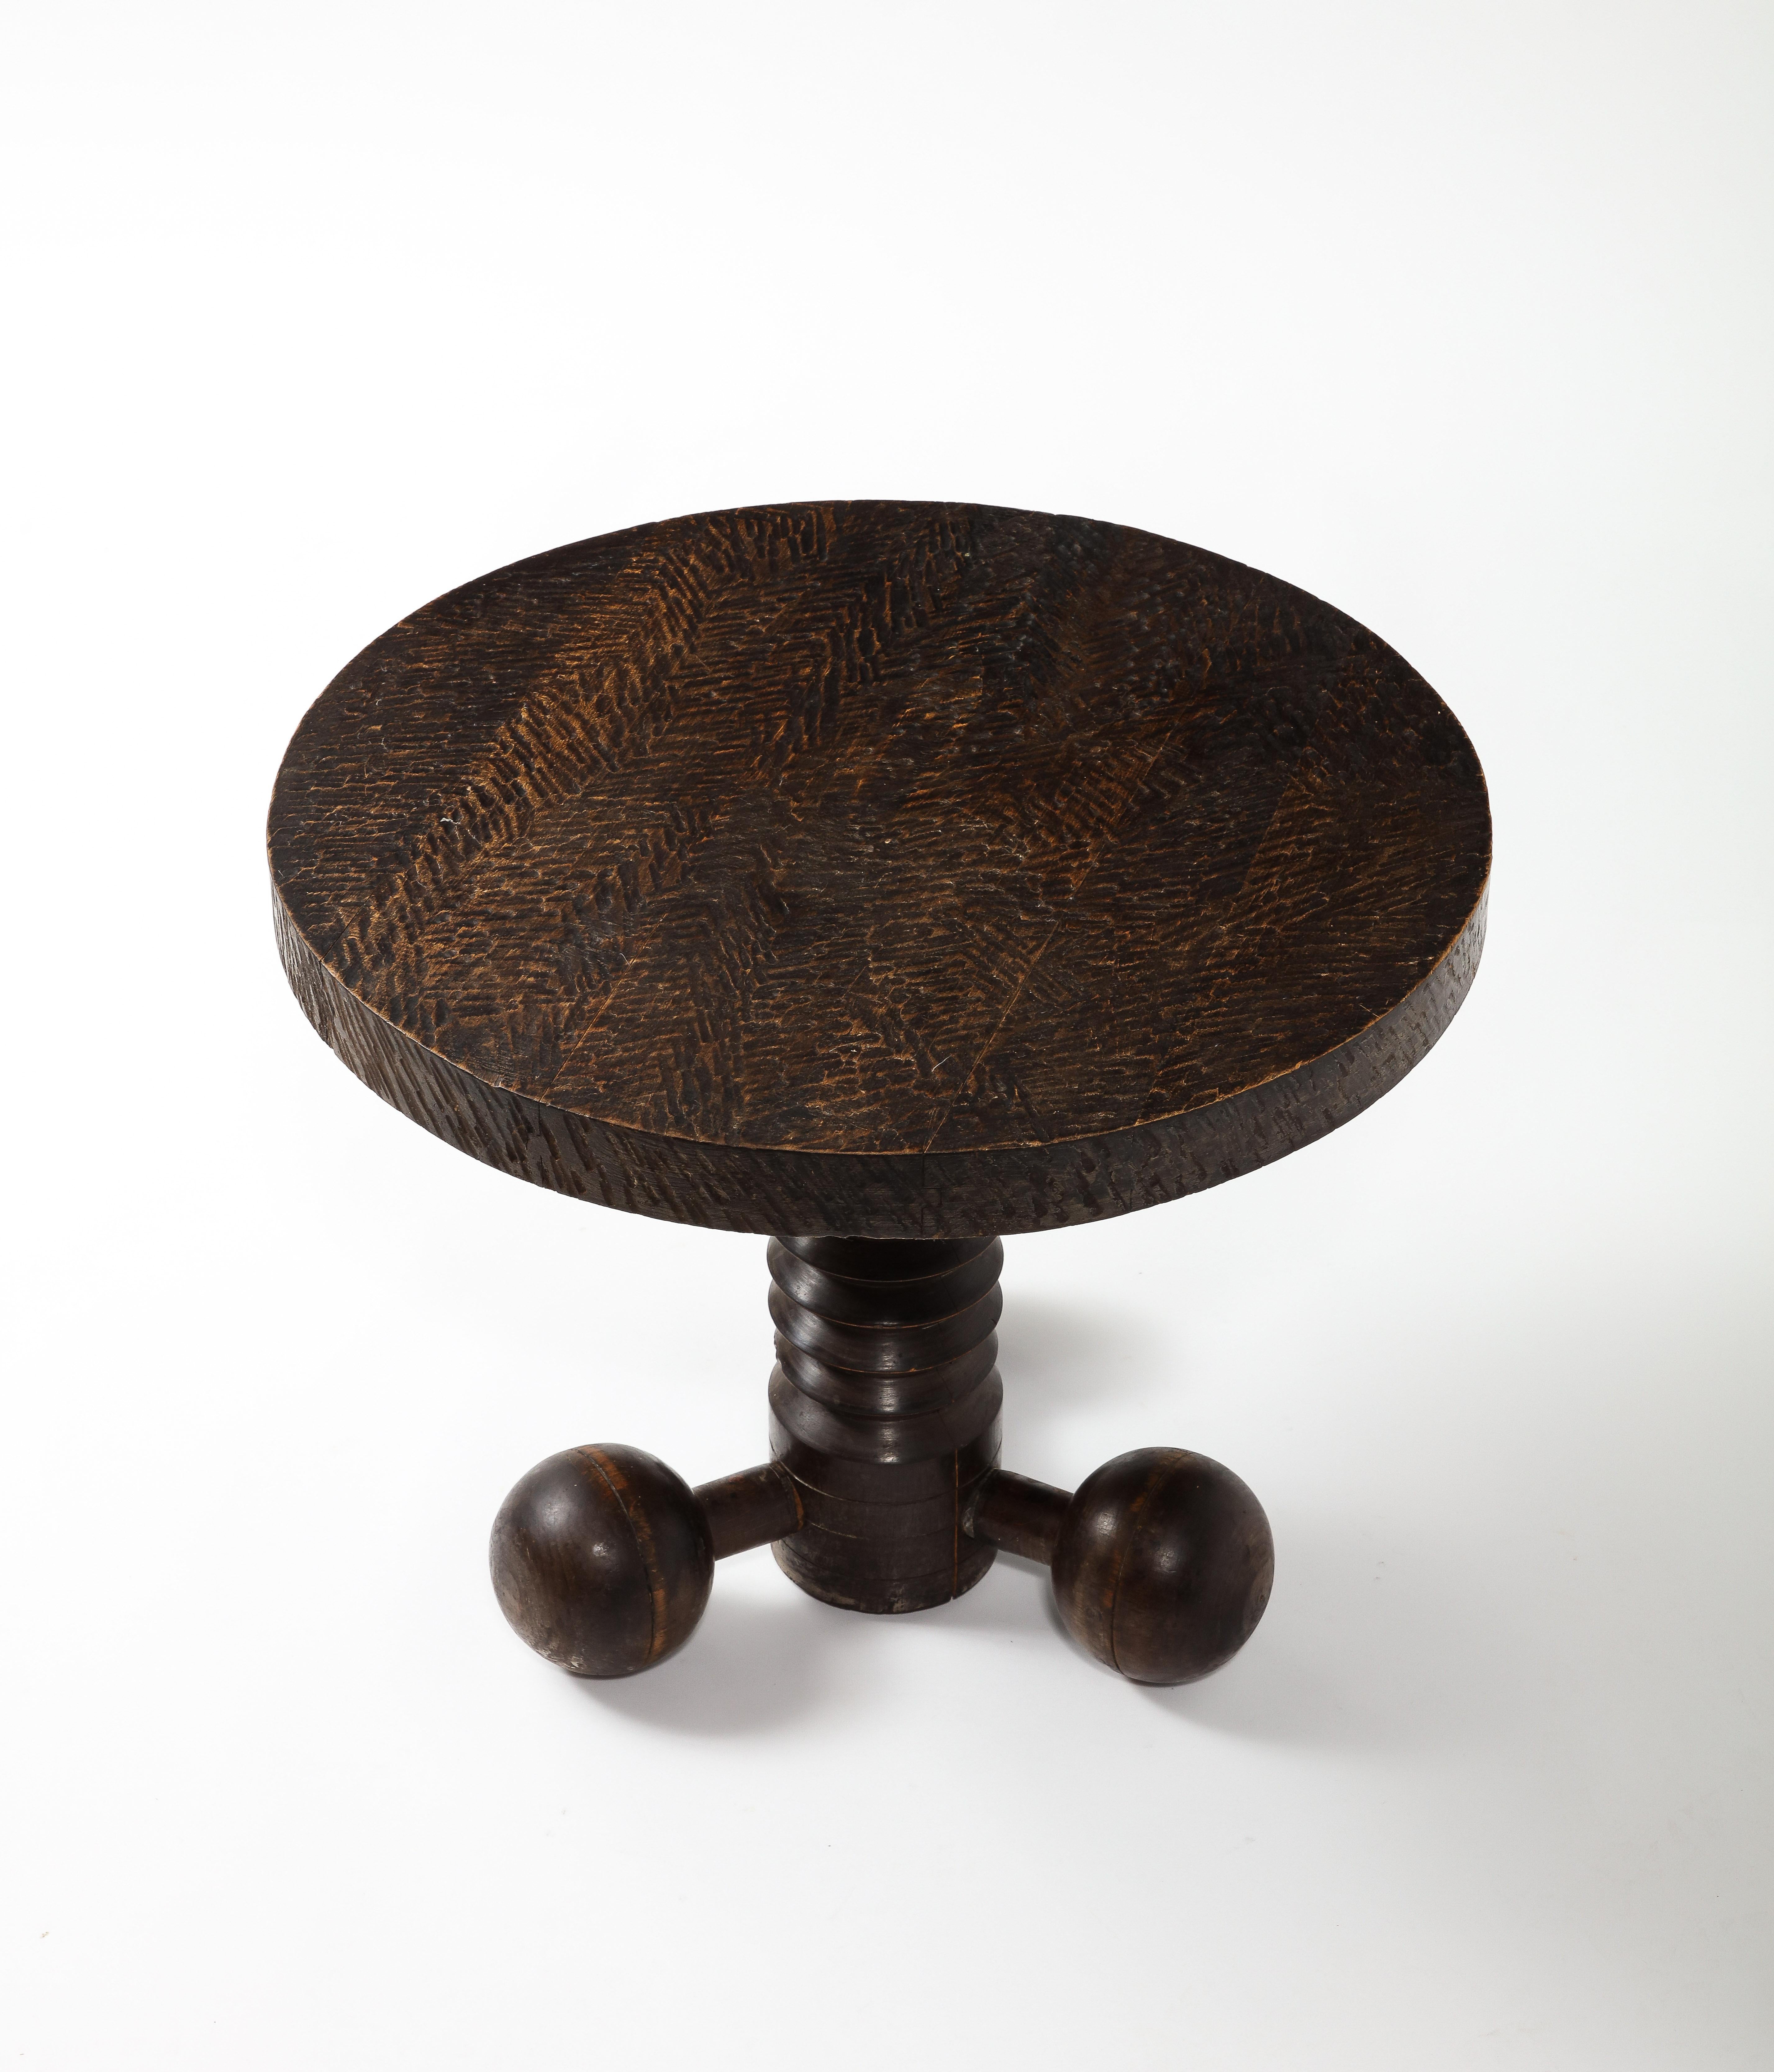 Finely carved and incised end table by Charles Douduyt, made of solid oak the incised top rest on a grooved column base supported by three detached spheres. An iconic form by this designer.